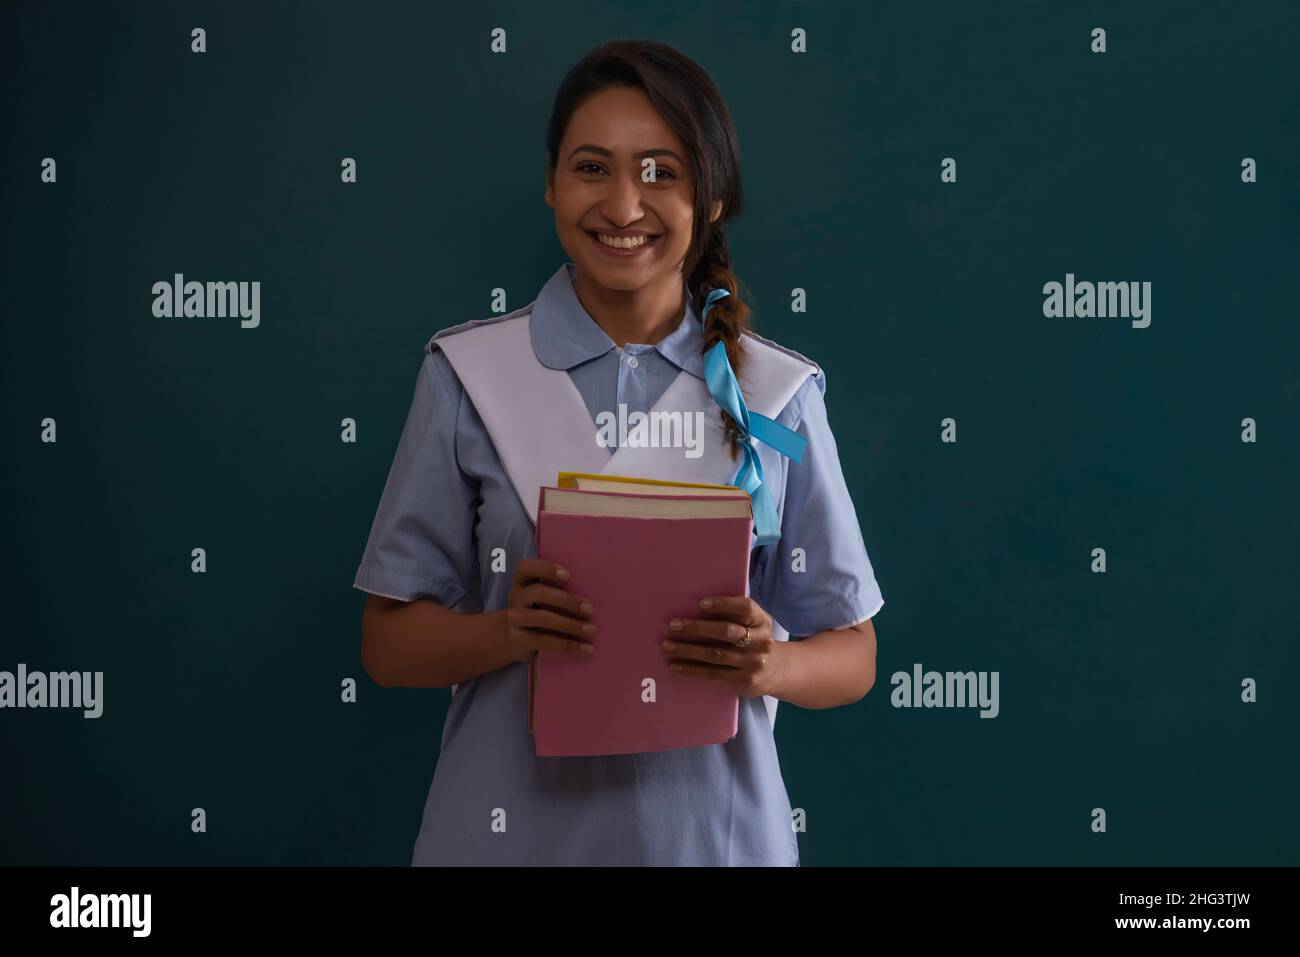 Young girl in school uniform standing with holding books Stock Photo